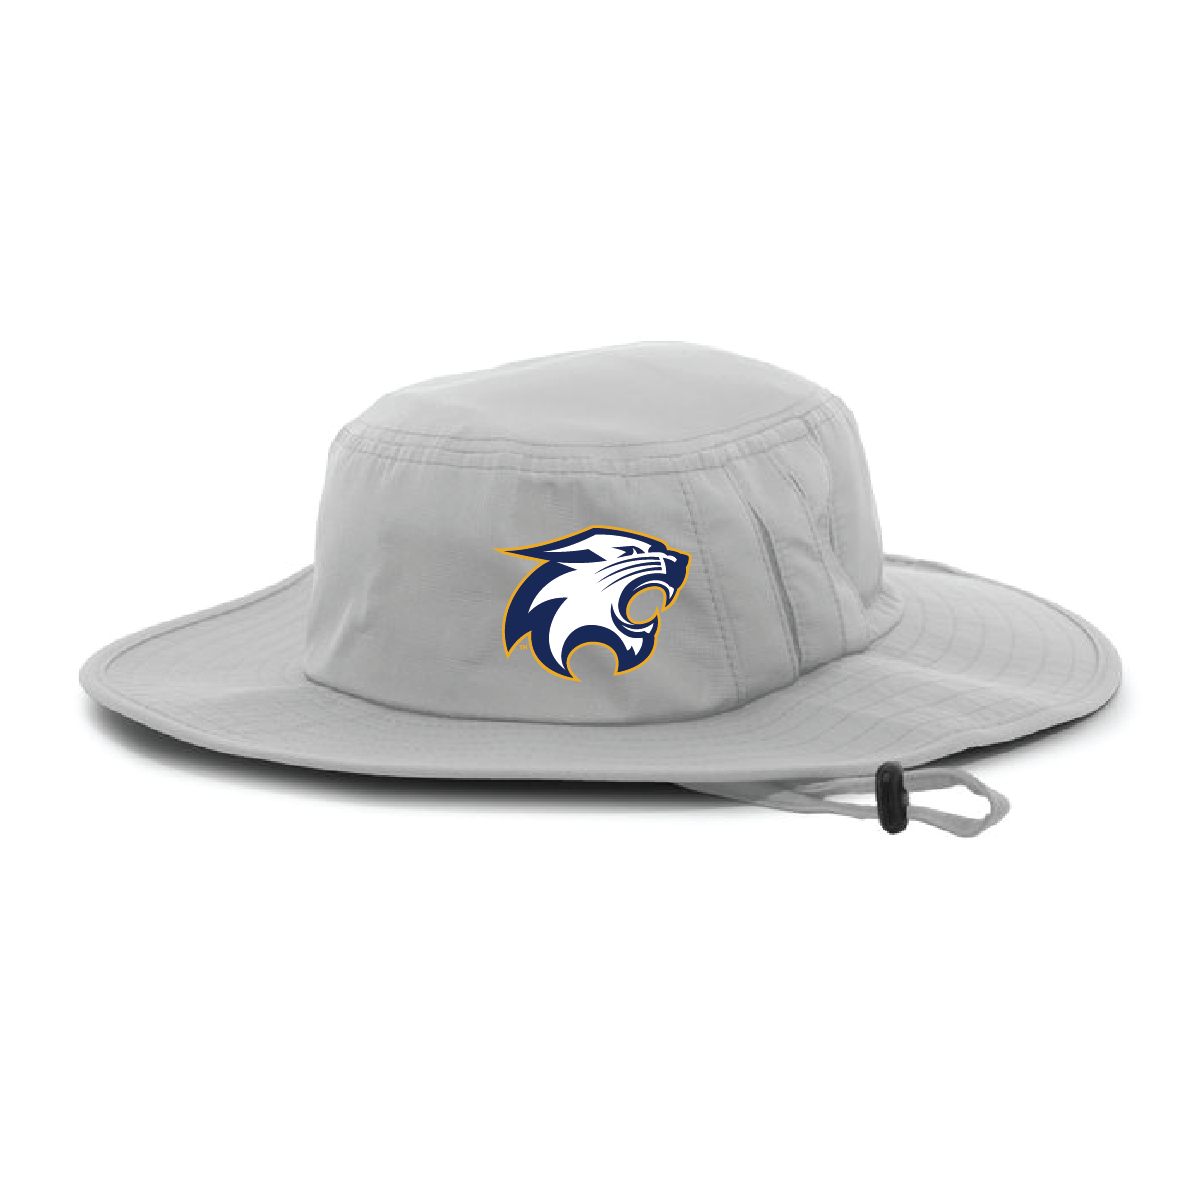 River Falls Retail Online Pacific Bucket Hat - White